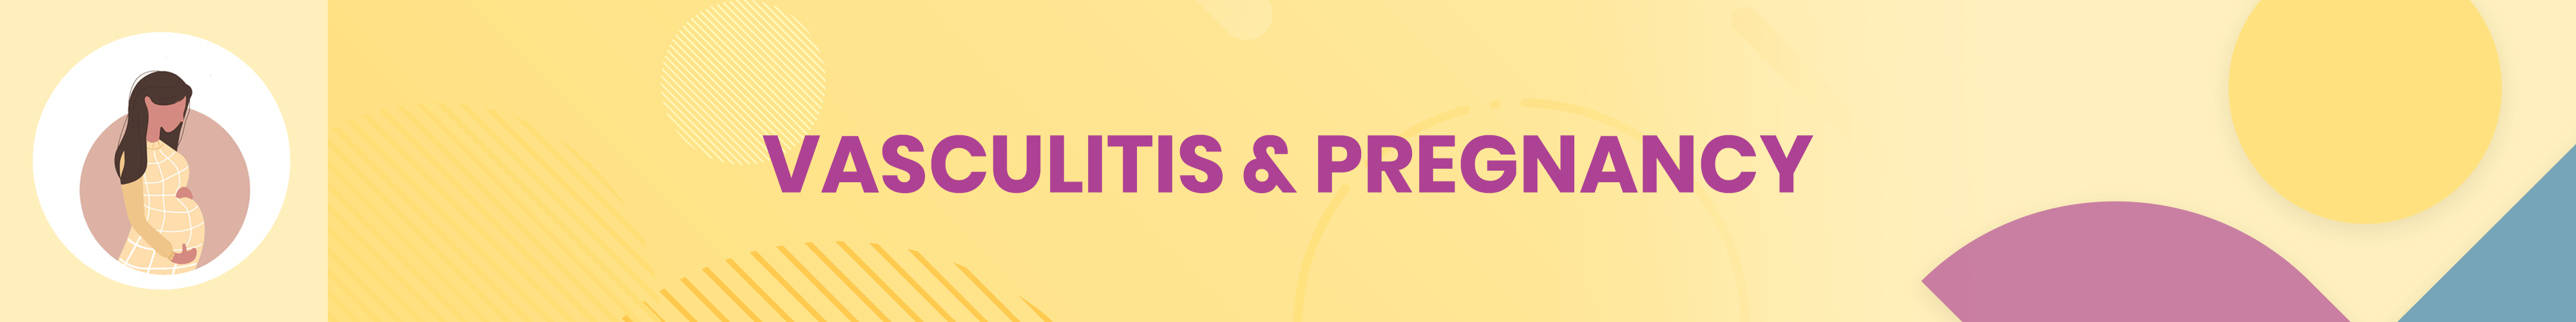 Vasculitis and Pregnancy Page header